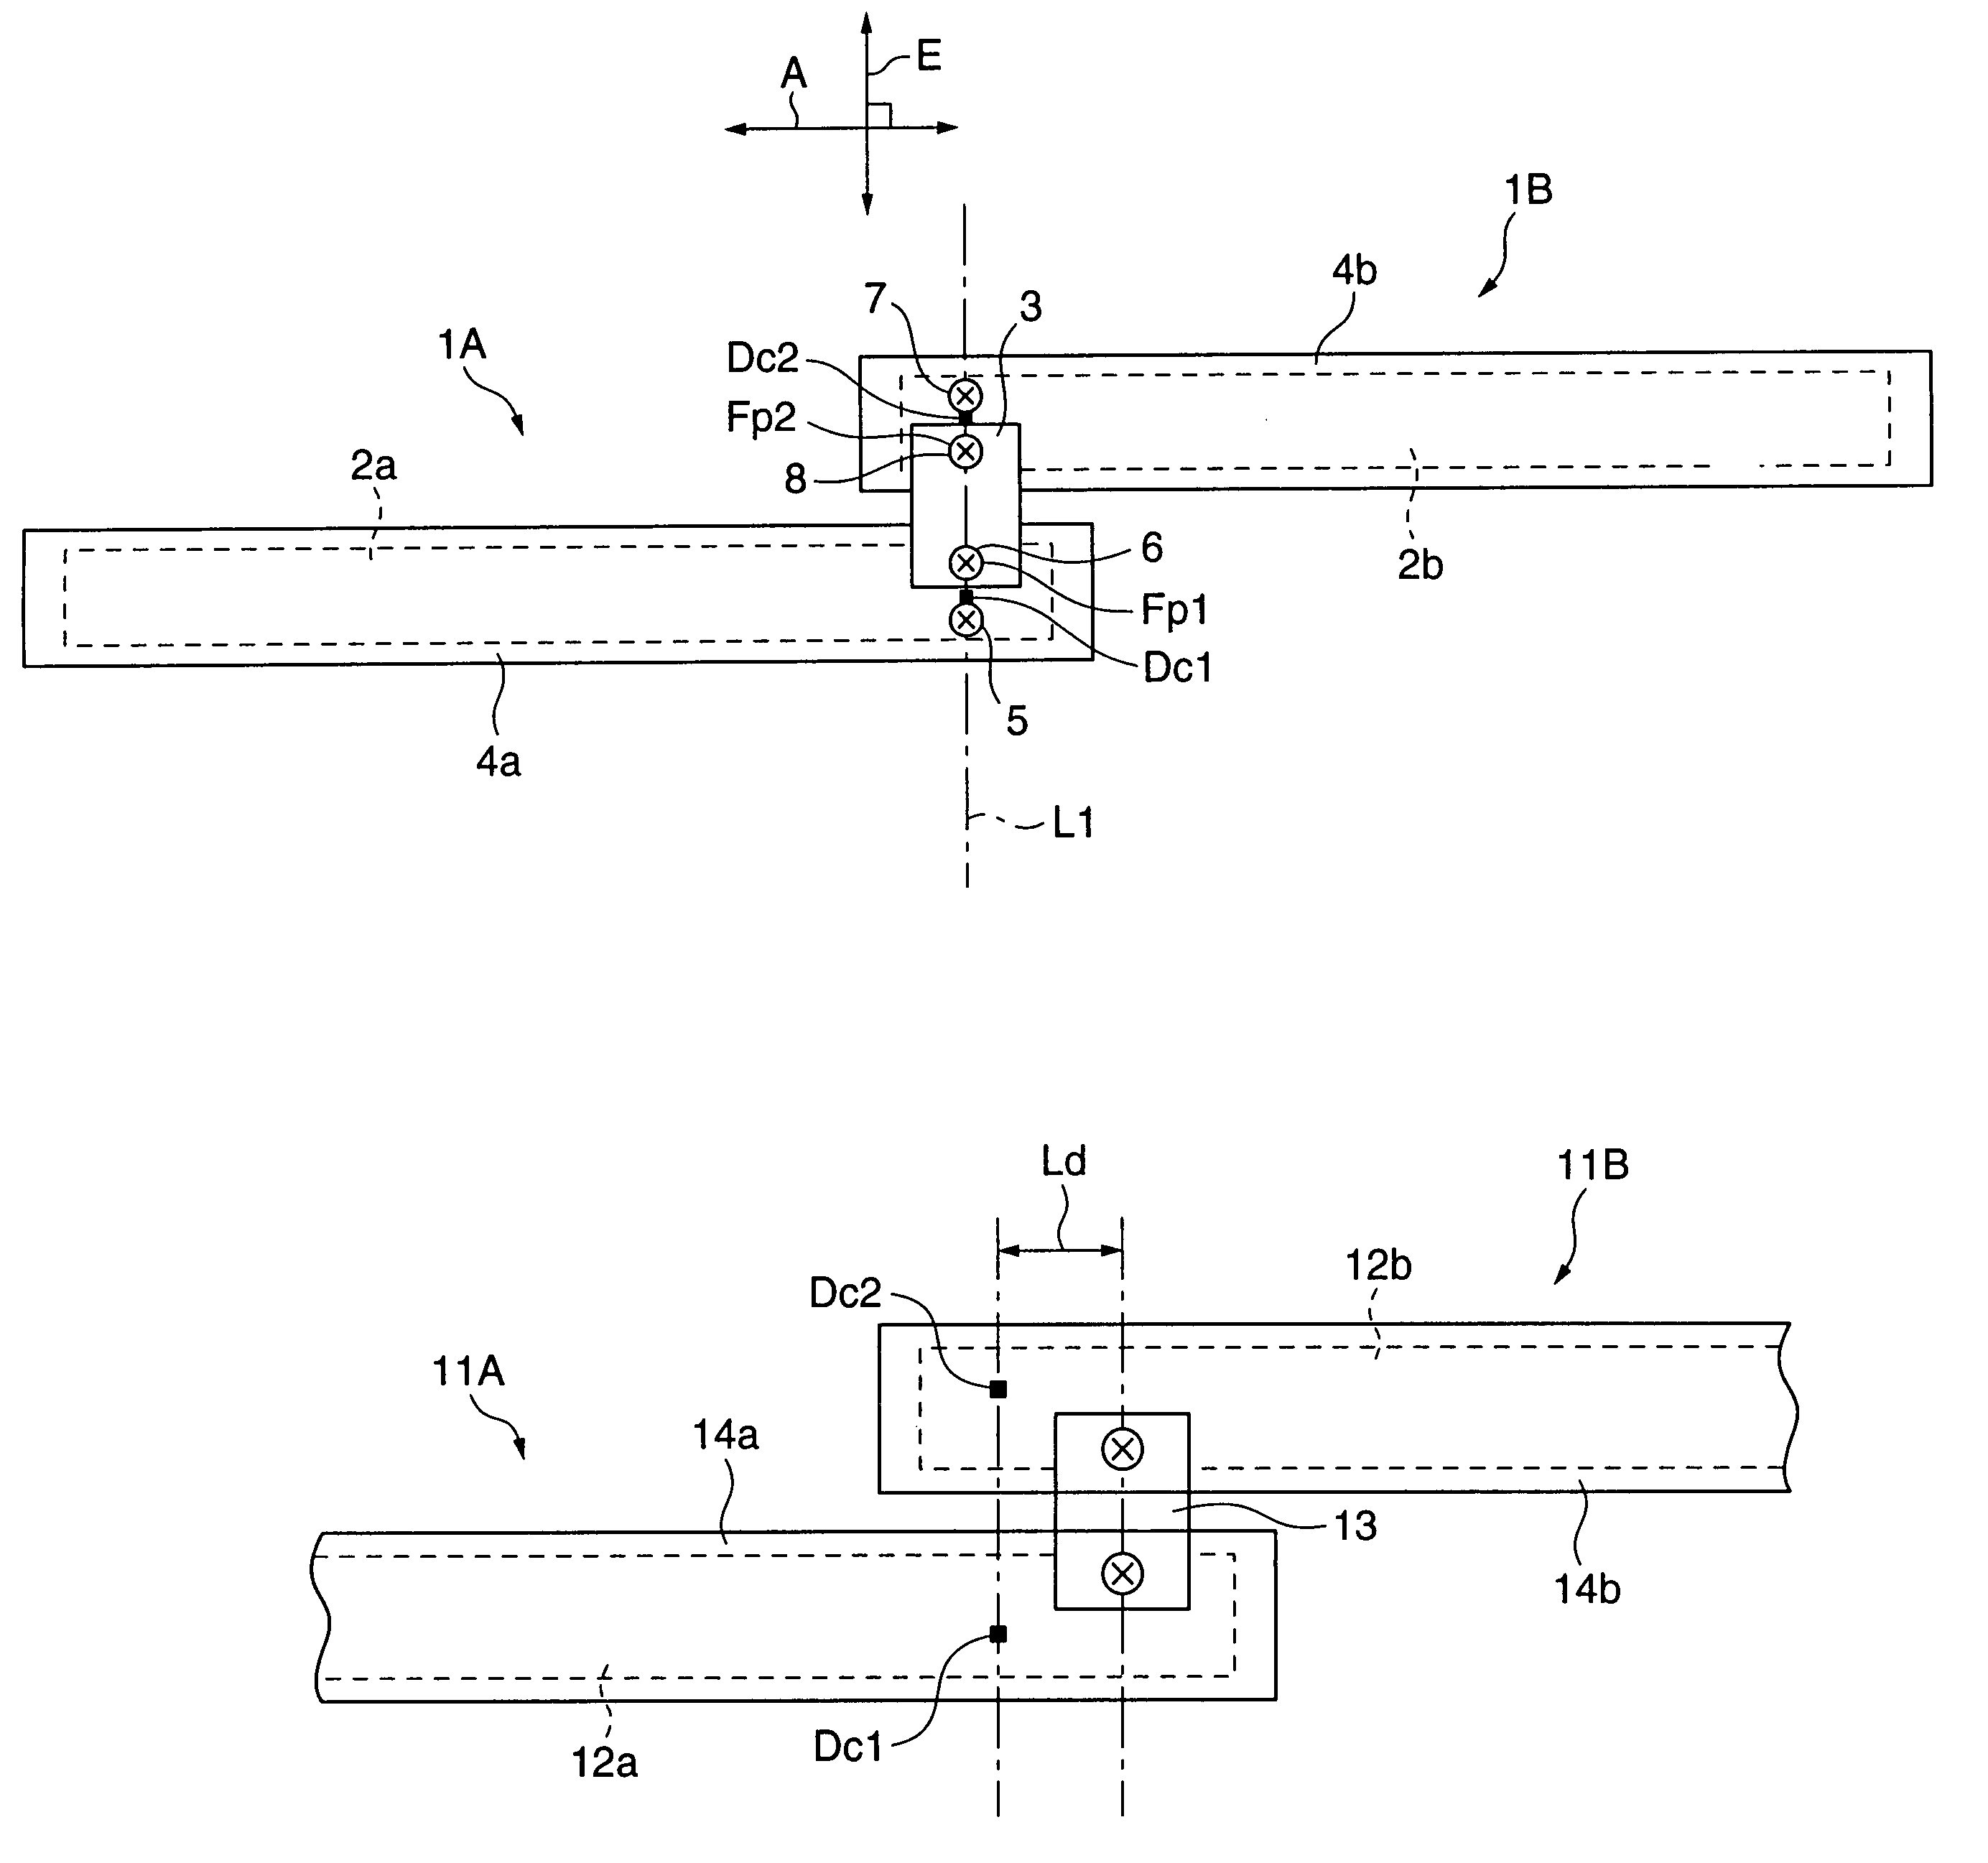 Optical write apparatus including a plurality of substrates